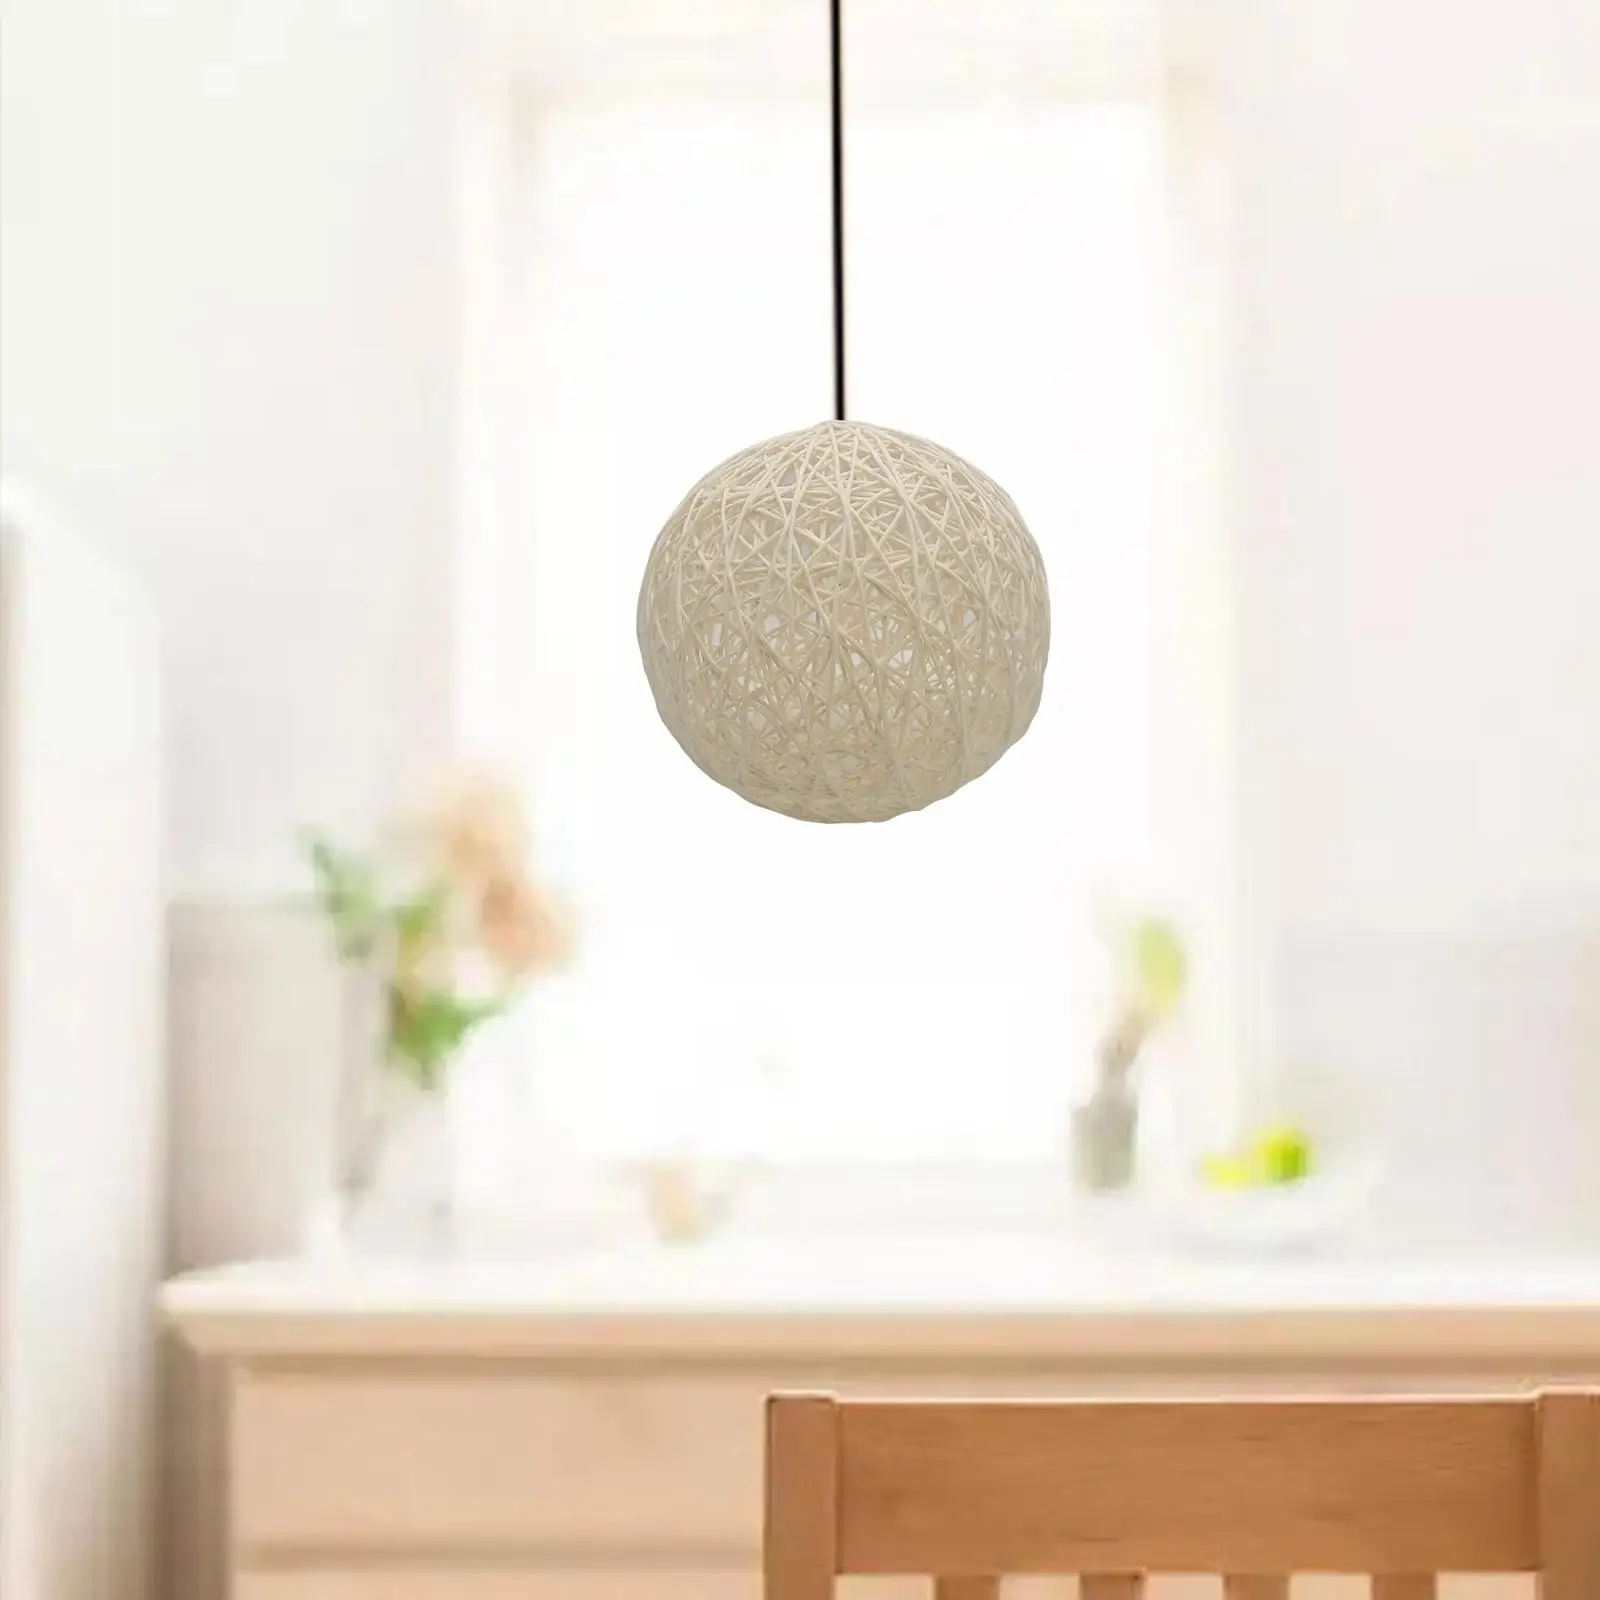 Ceiling Pendant Light Shade Chandelier Lamp Shade Lamp Holder Lantern Rustic Paper Rope Ball Lampshade for Tea House dining